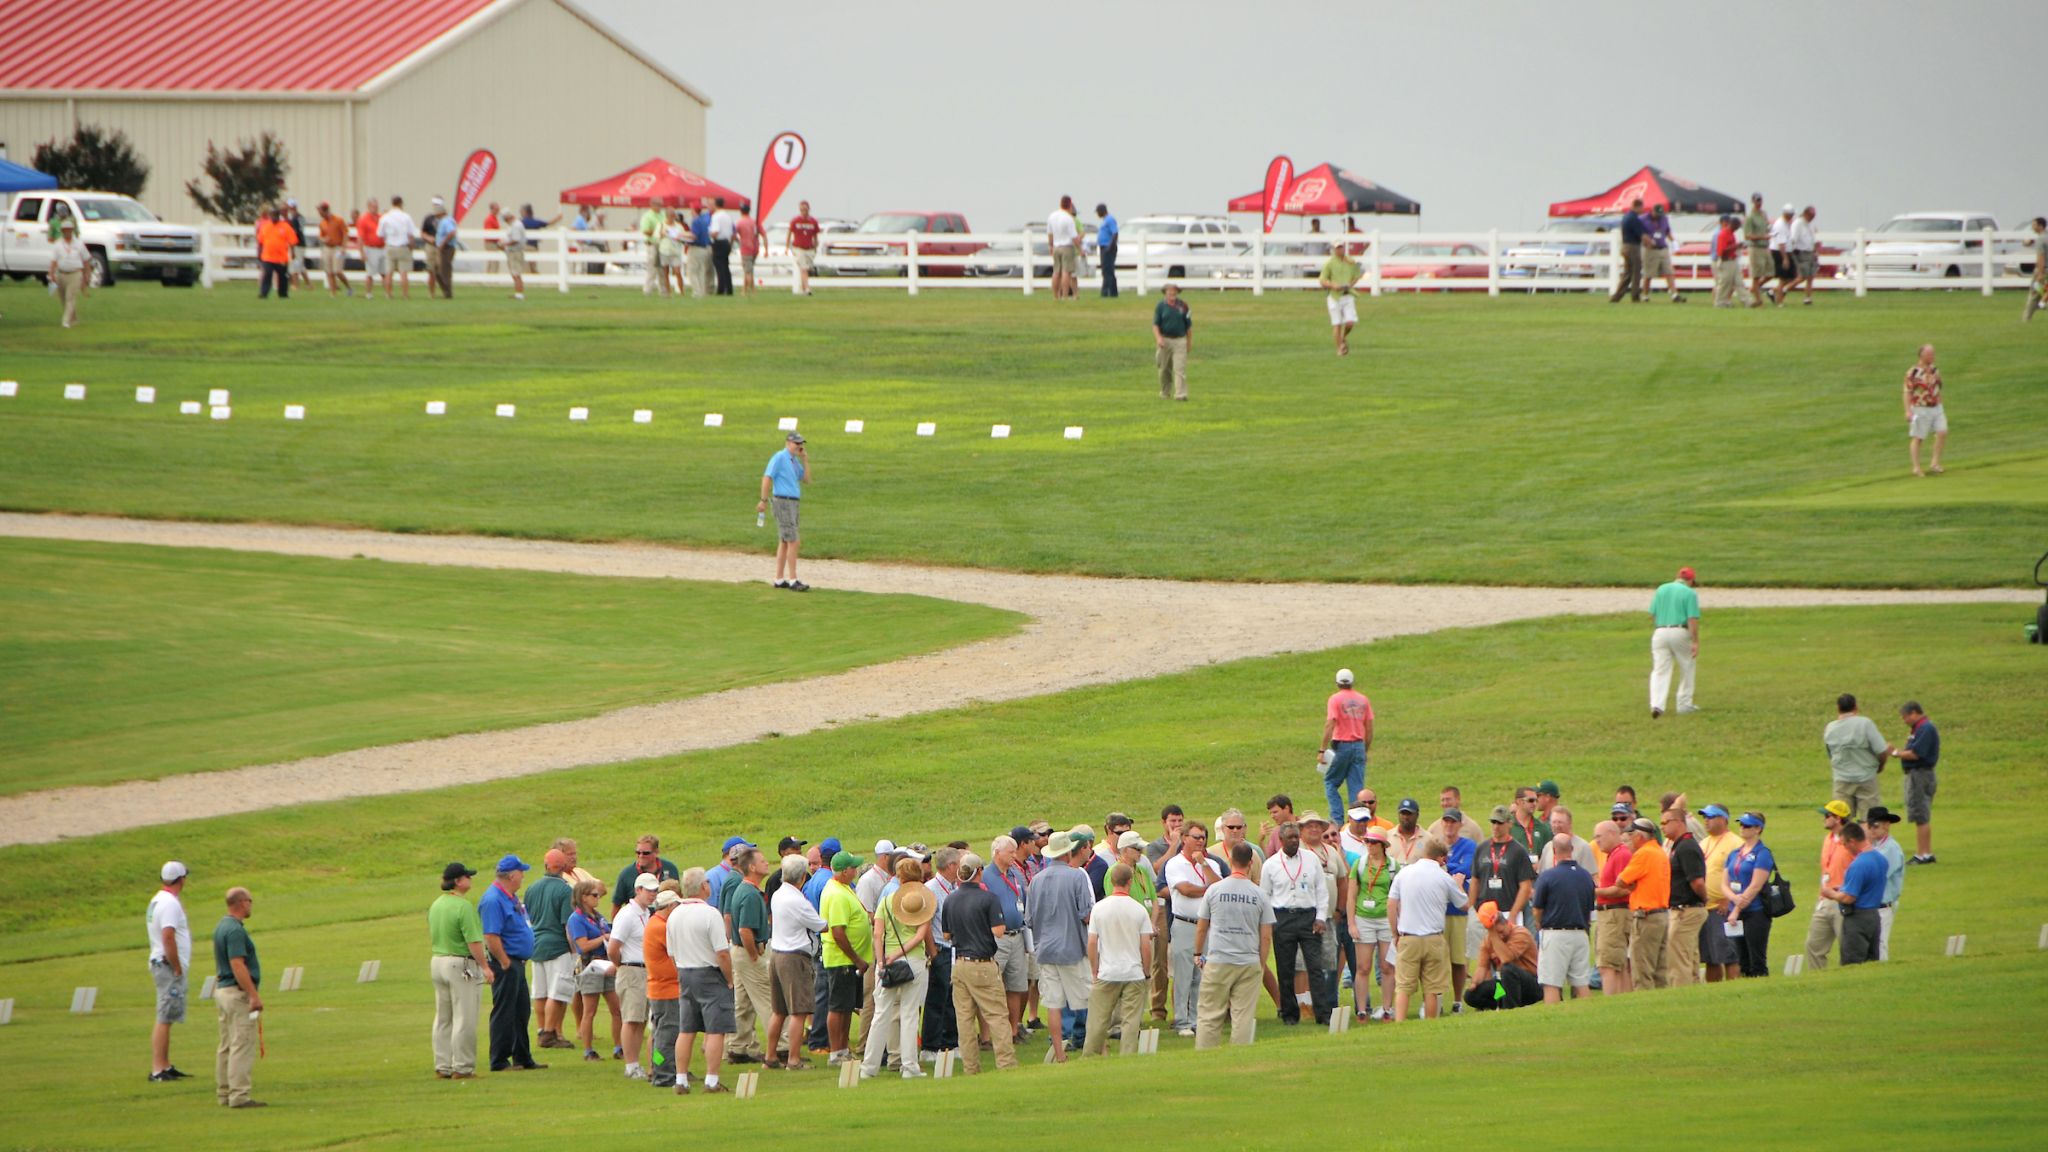 A gathering of people on a turfgrass field.